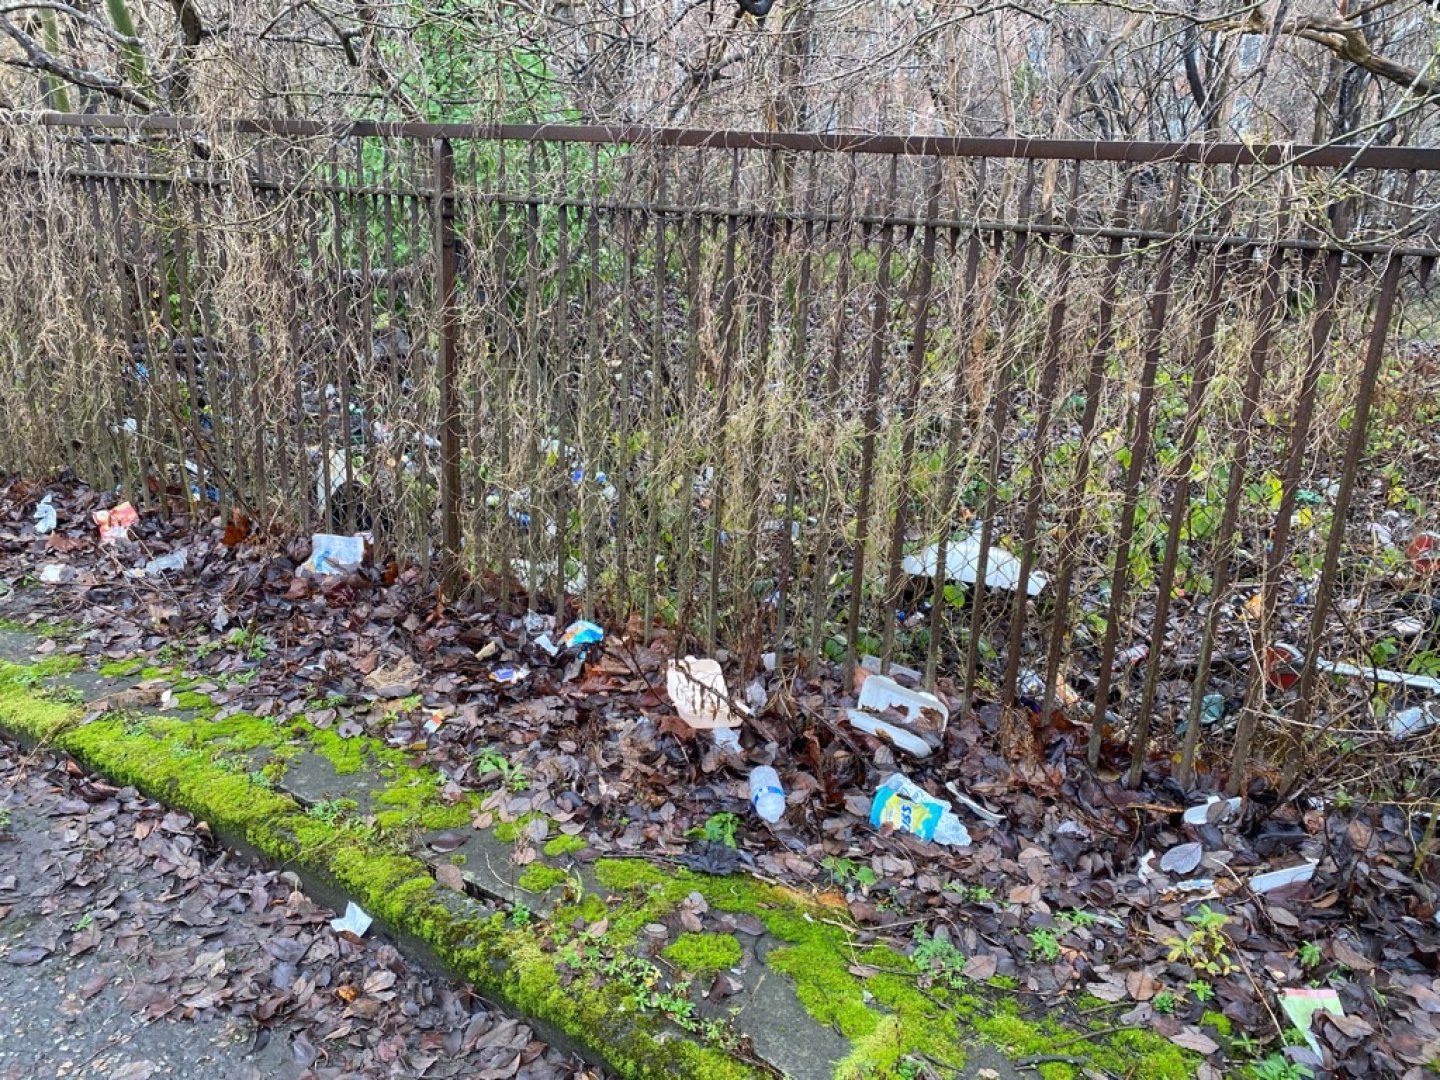 Iron fence, trees, with trash scattered among the leaves on the ground